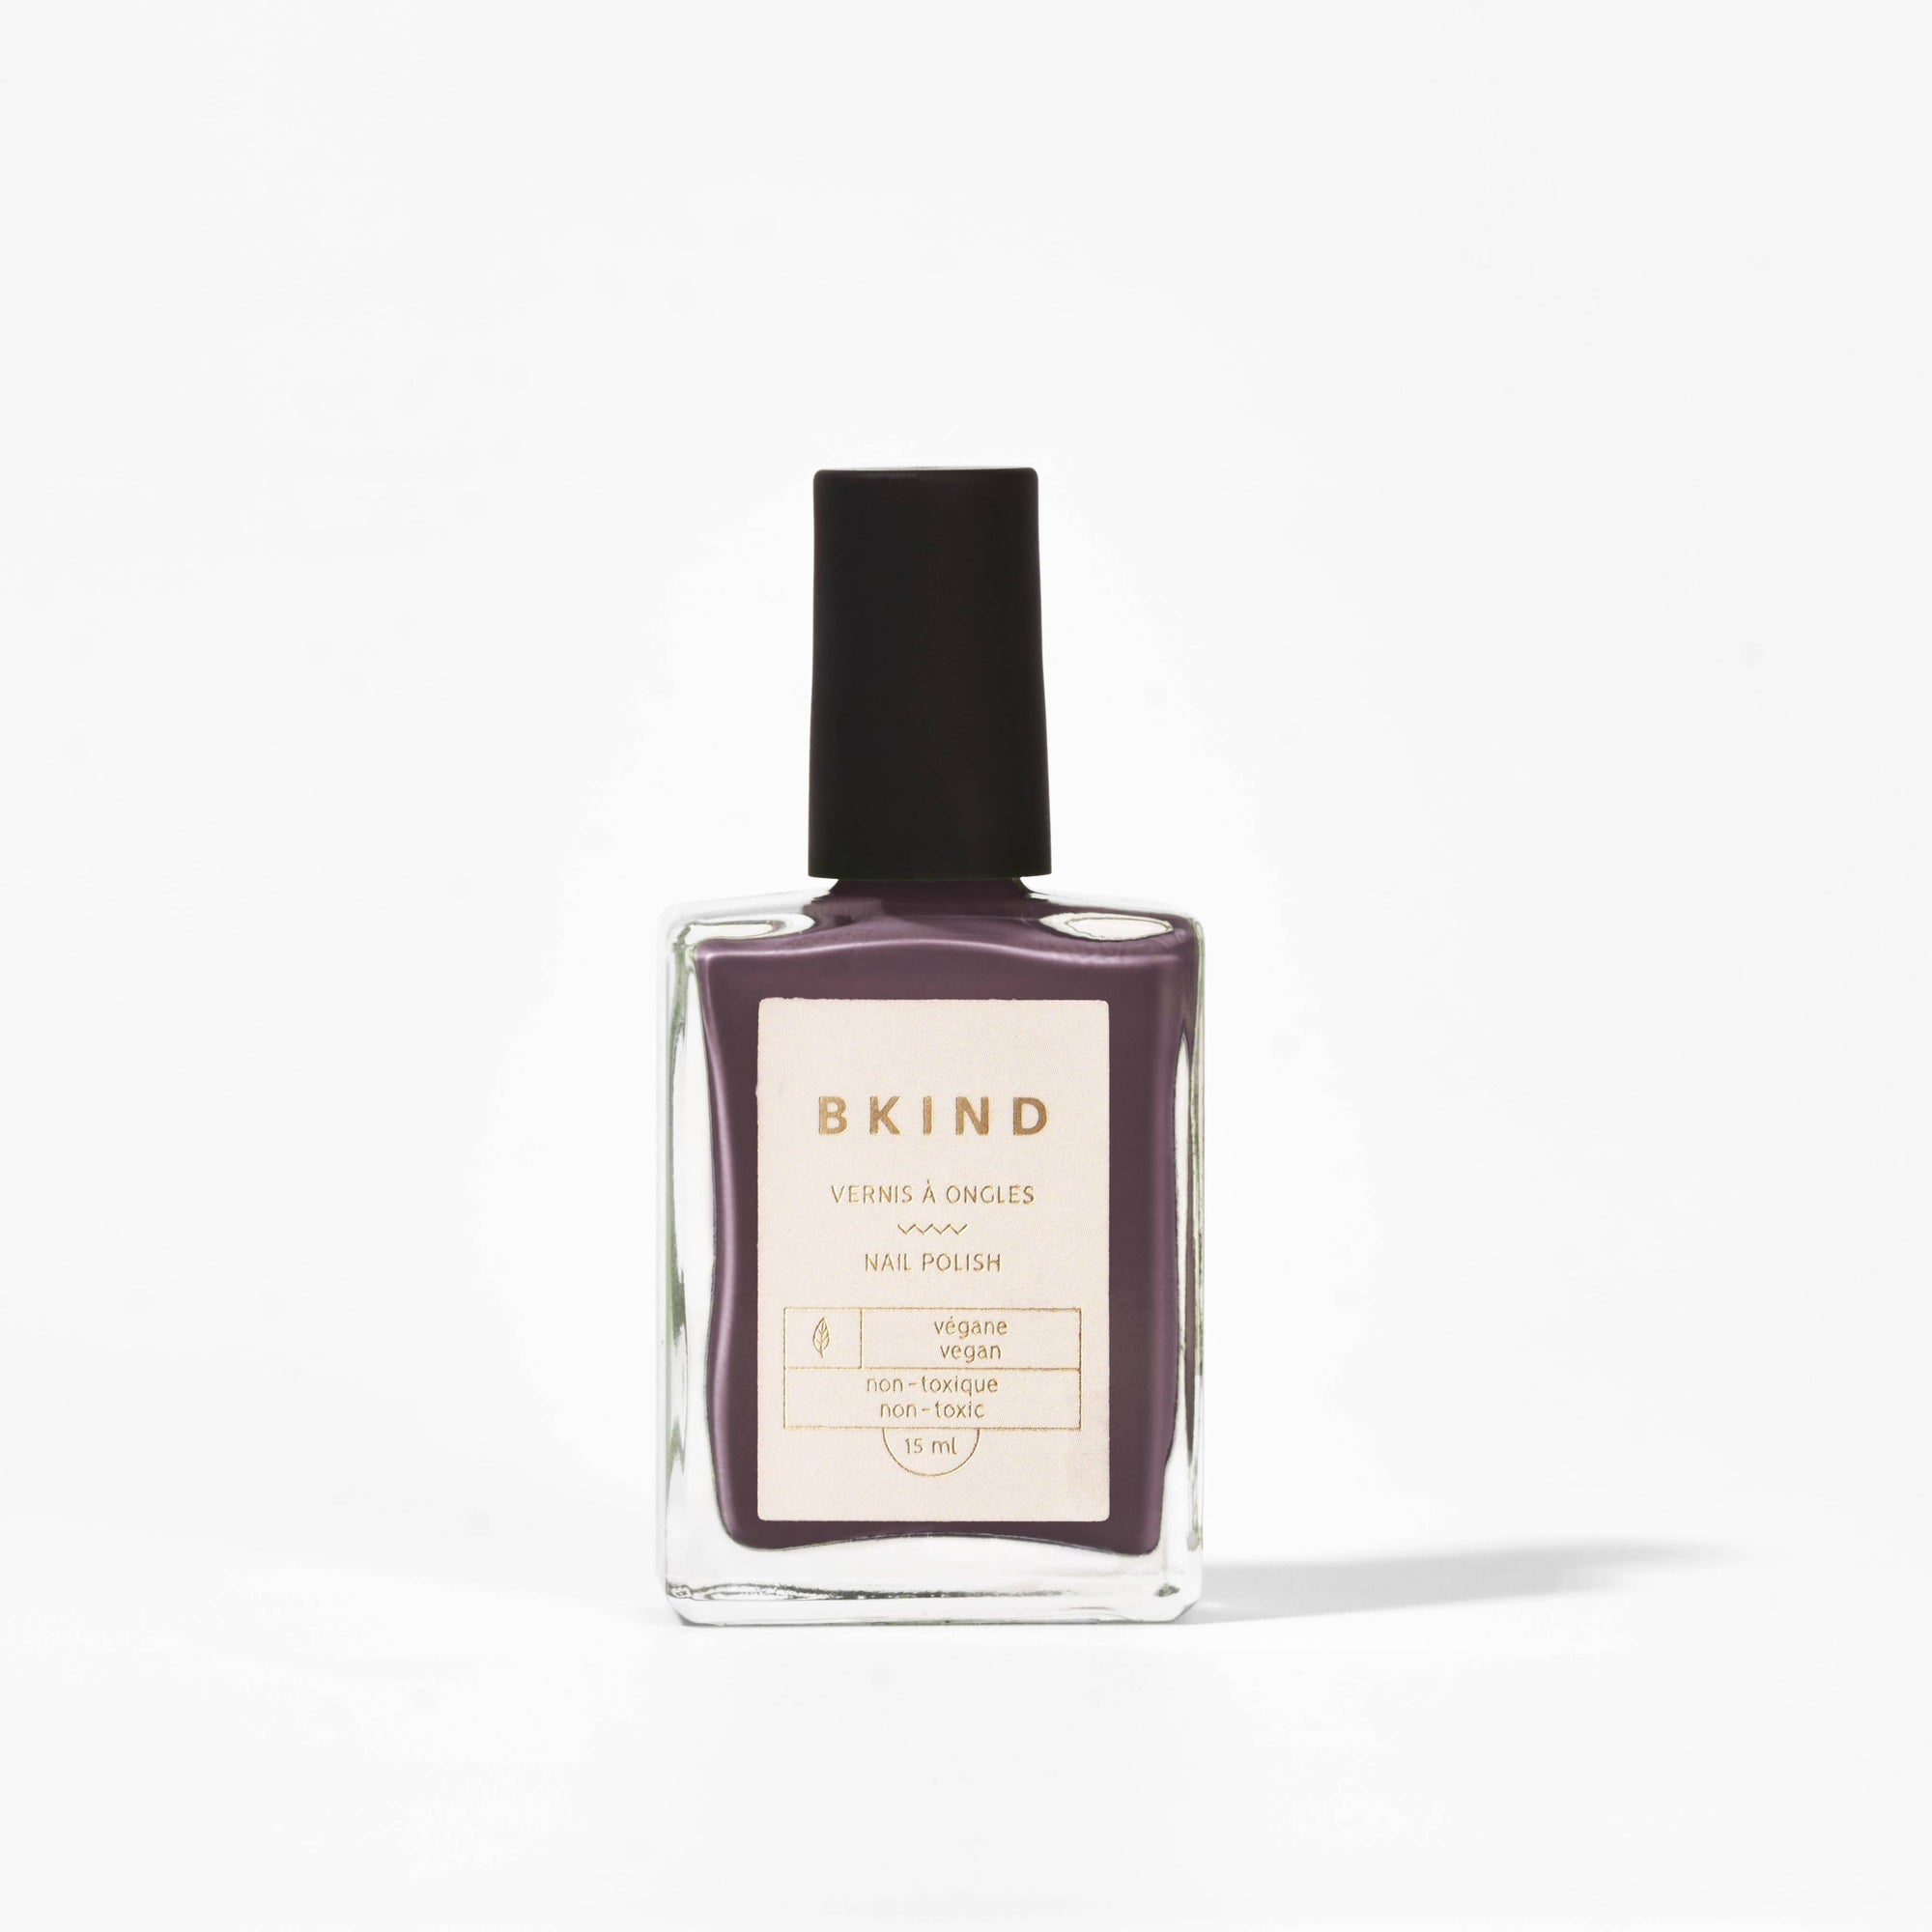 BKIND nail polish in a dusty purple color with lavender undertones